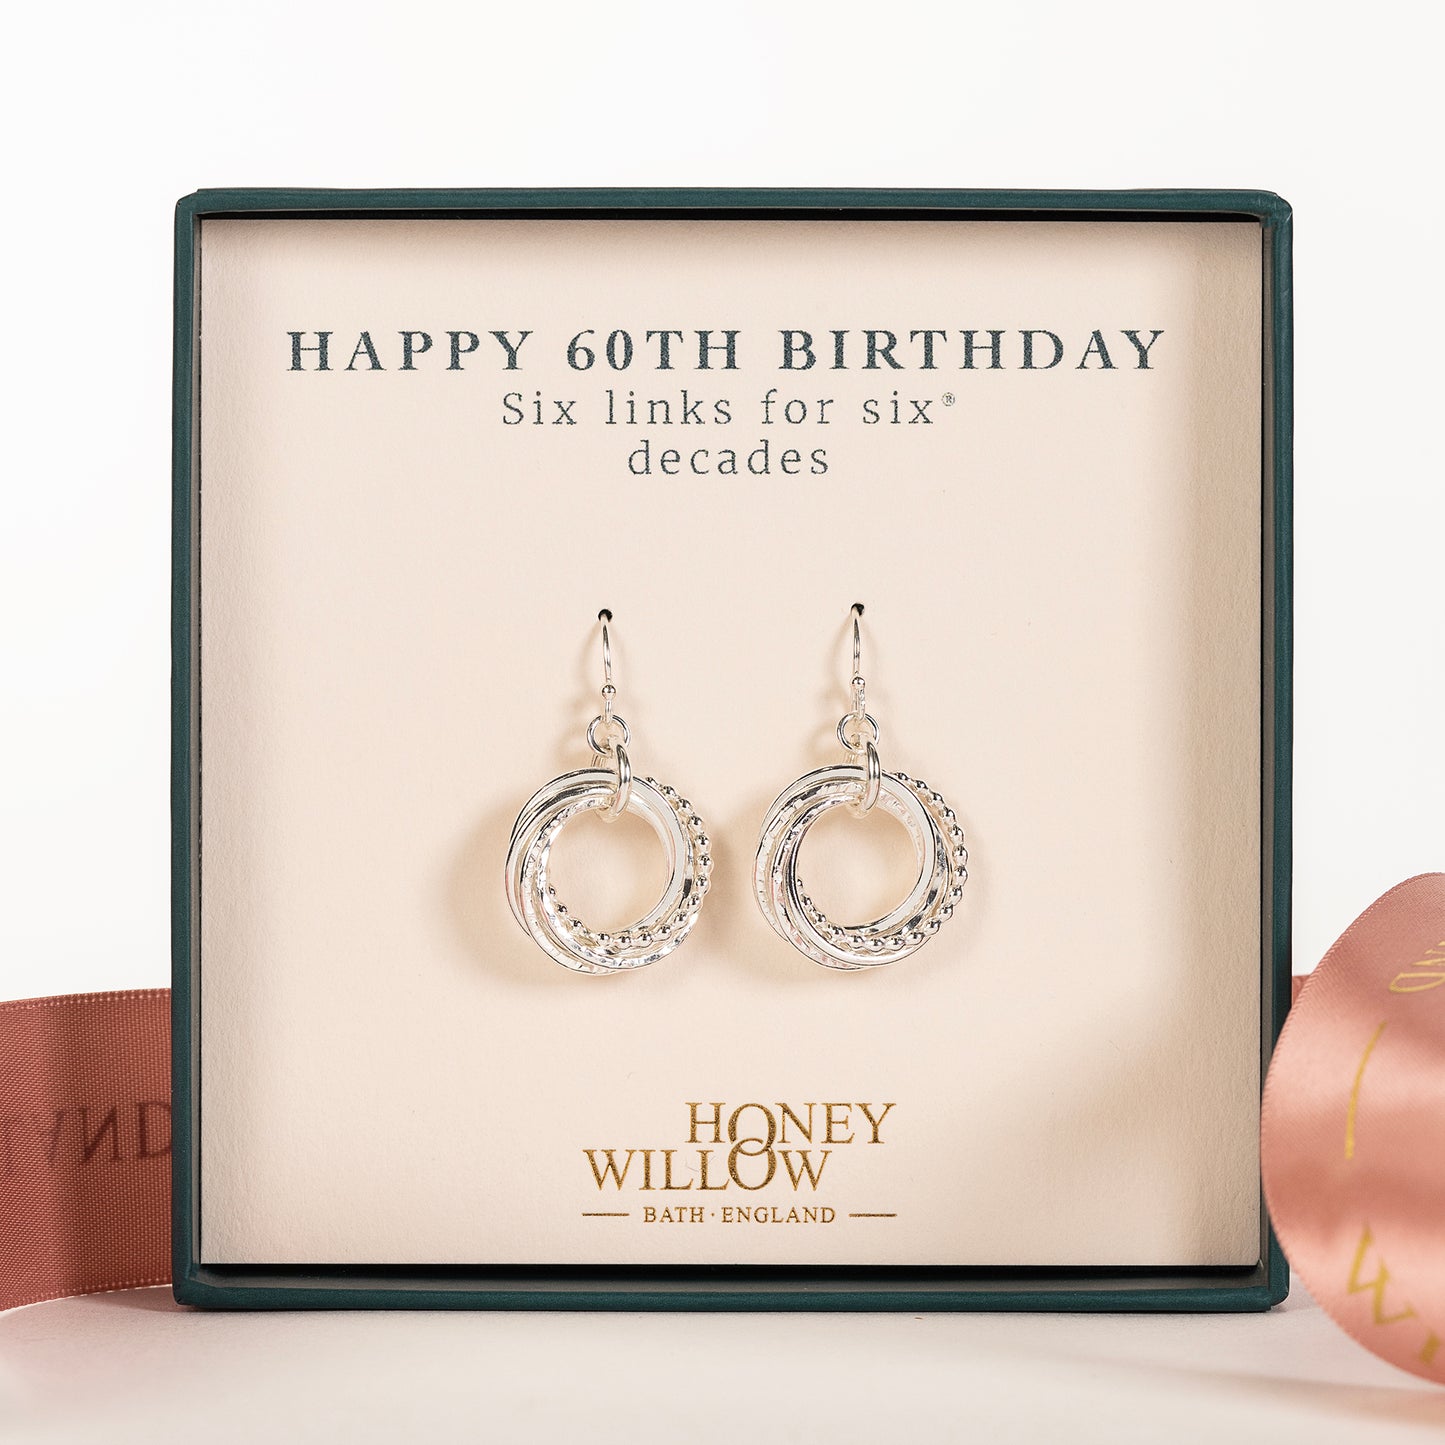 60th Birthday Earrings - The Original 6 Links for 6 Decades - Petite Silver